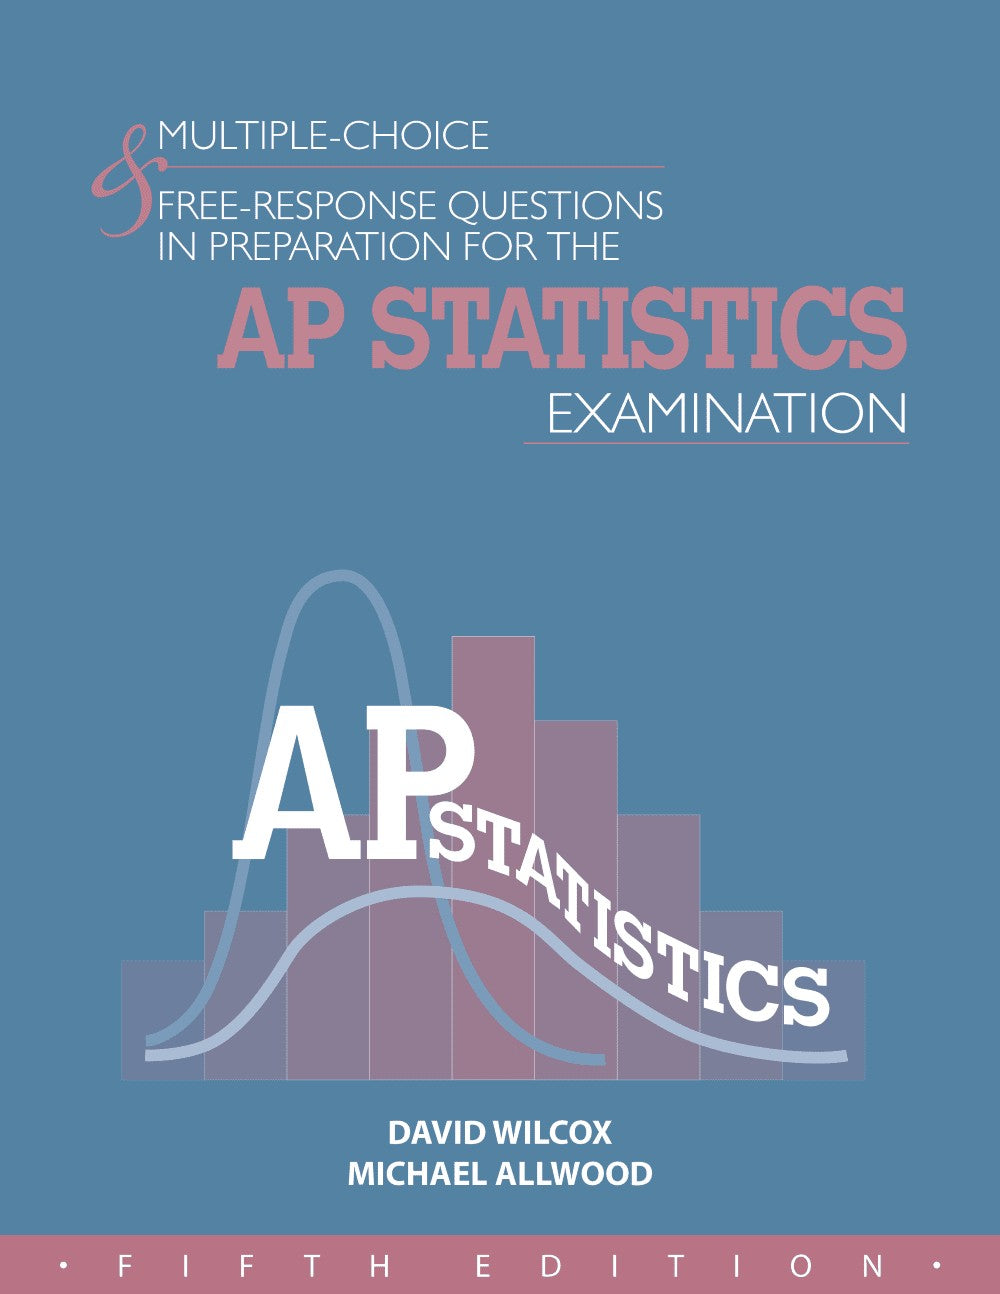 **NEW** MULTIPLE-CHOICE & FREE-RESPONSE QUESTIONS IN PREPARATION FOR THE AP STATISTICS EXAMINATION - 5TH ED.